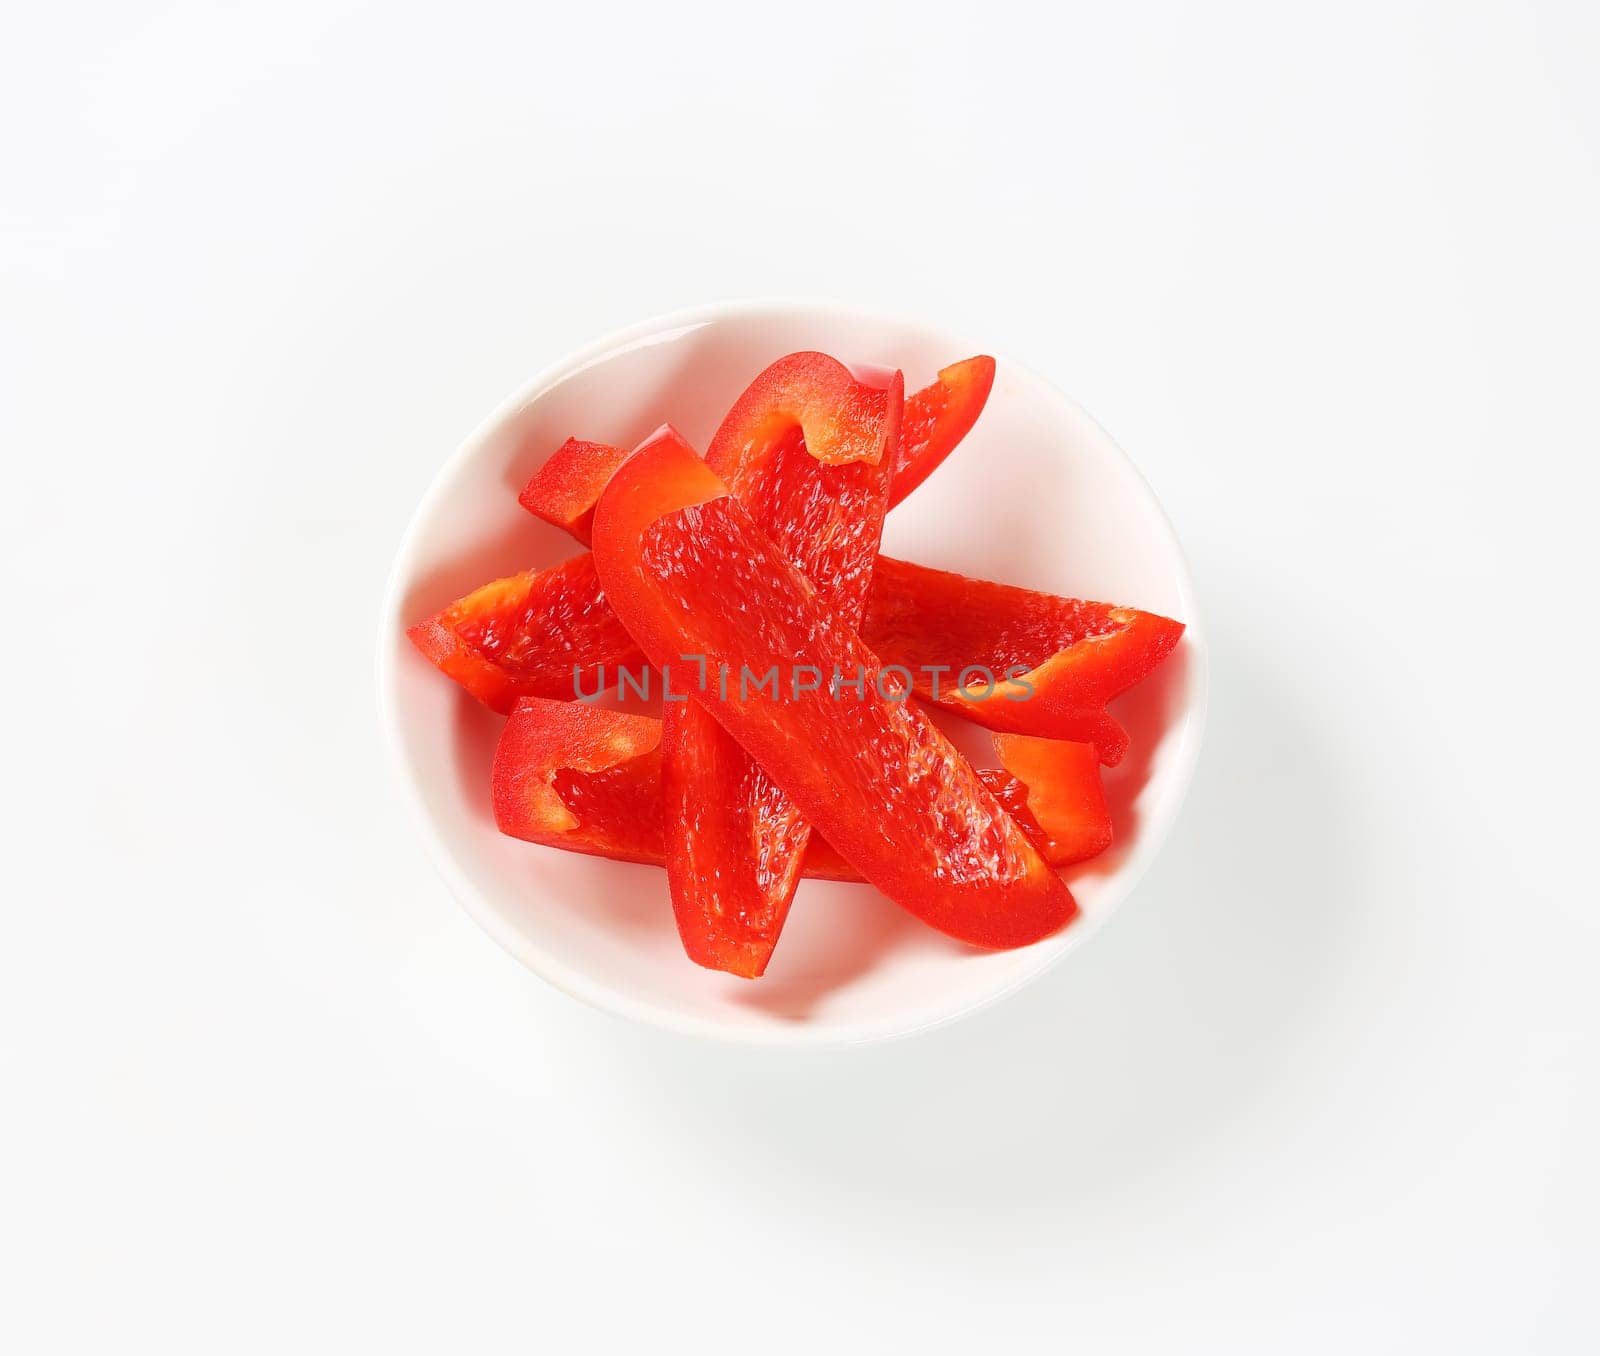 Thin slices of red bell pepper in white bowl